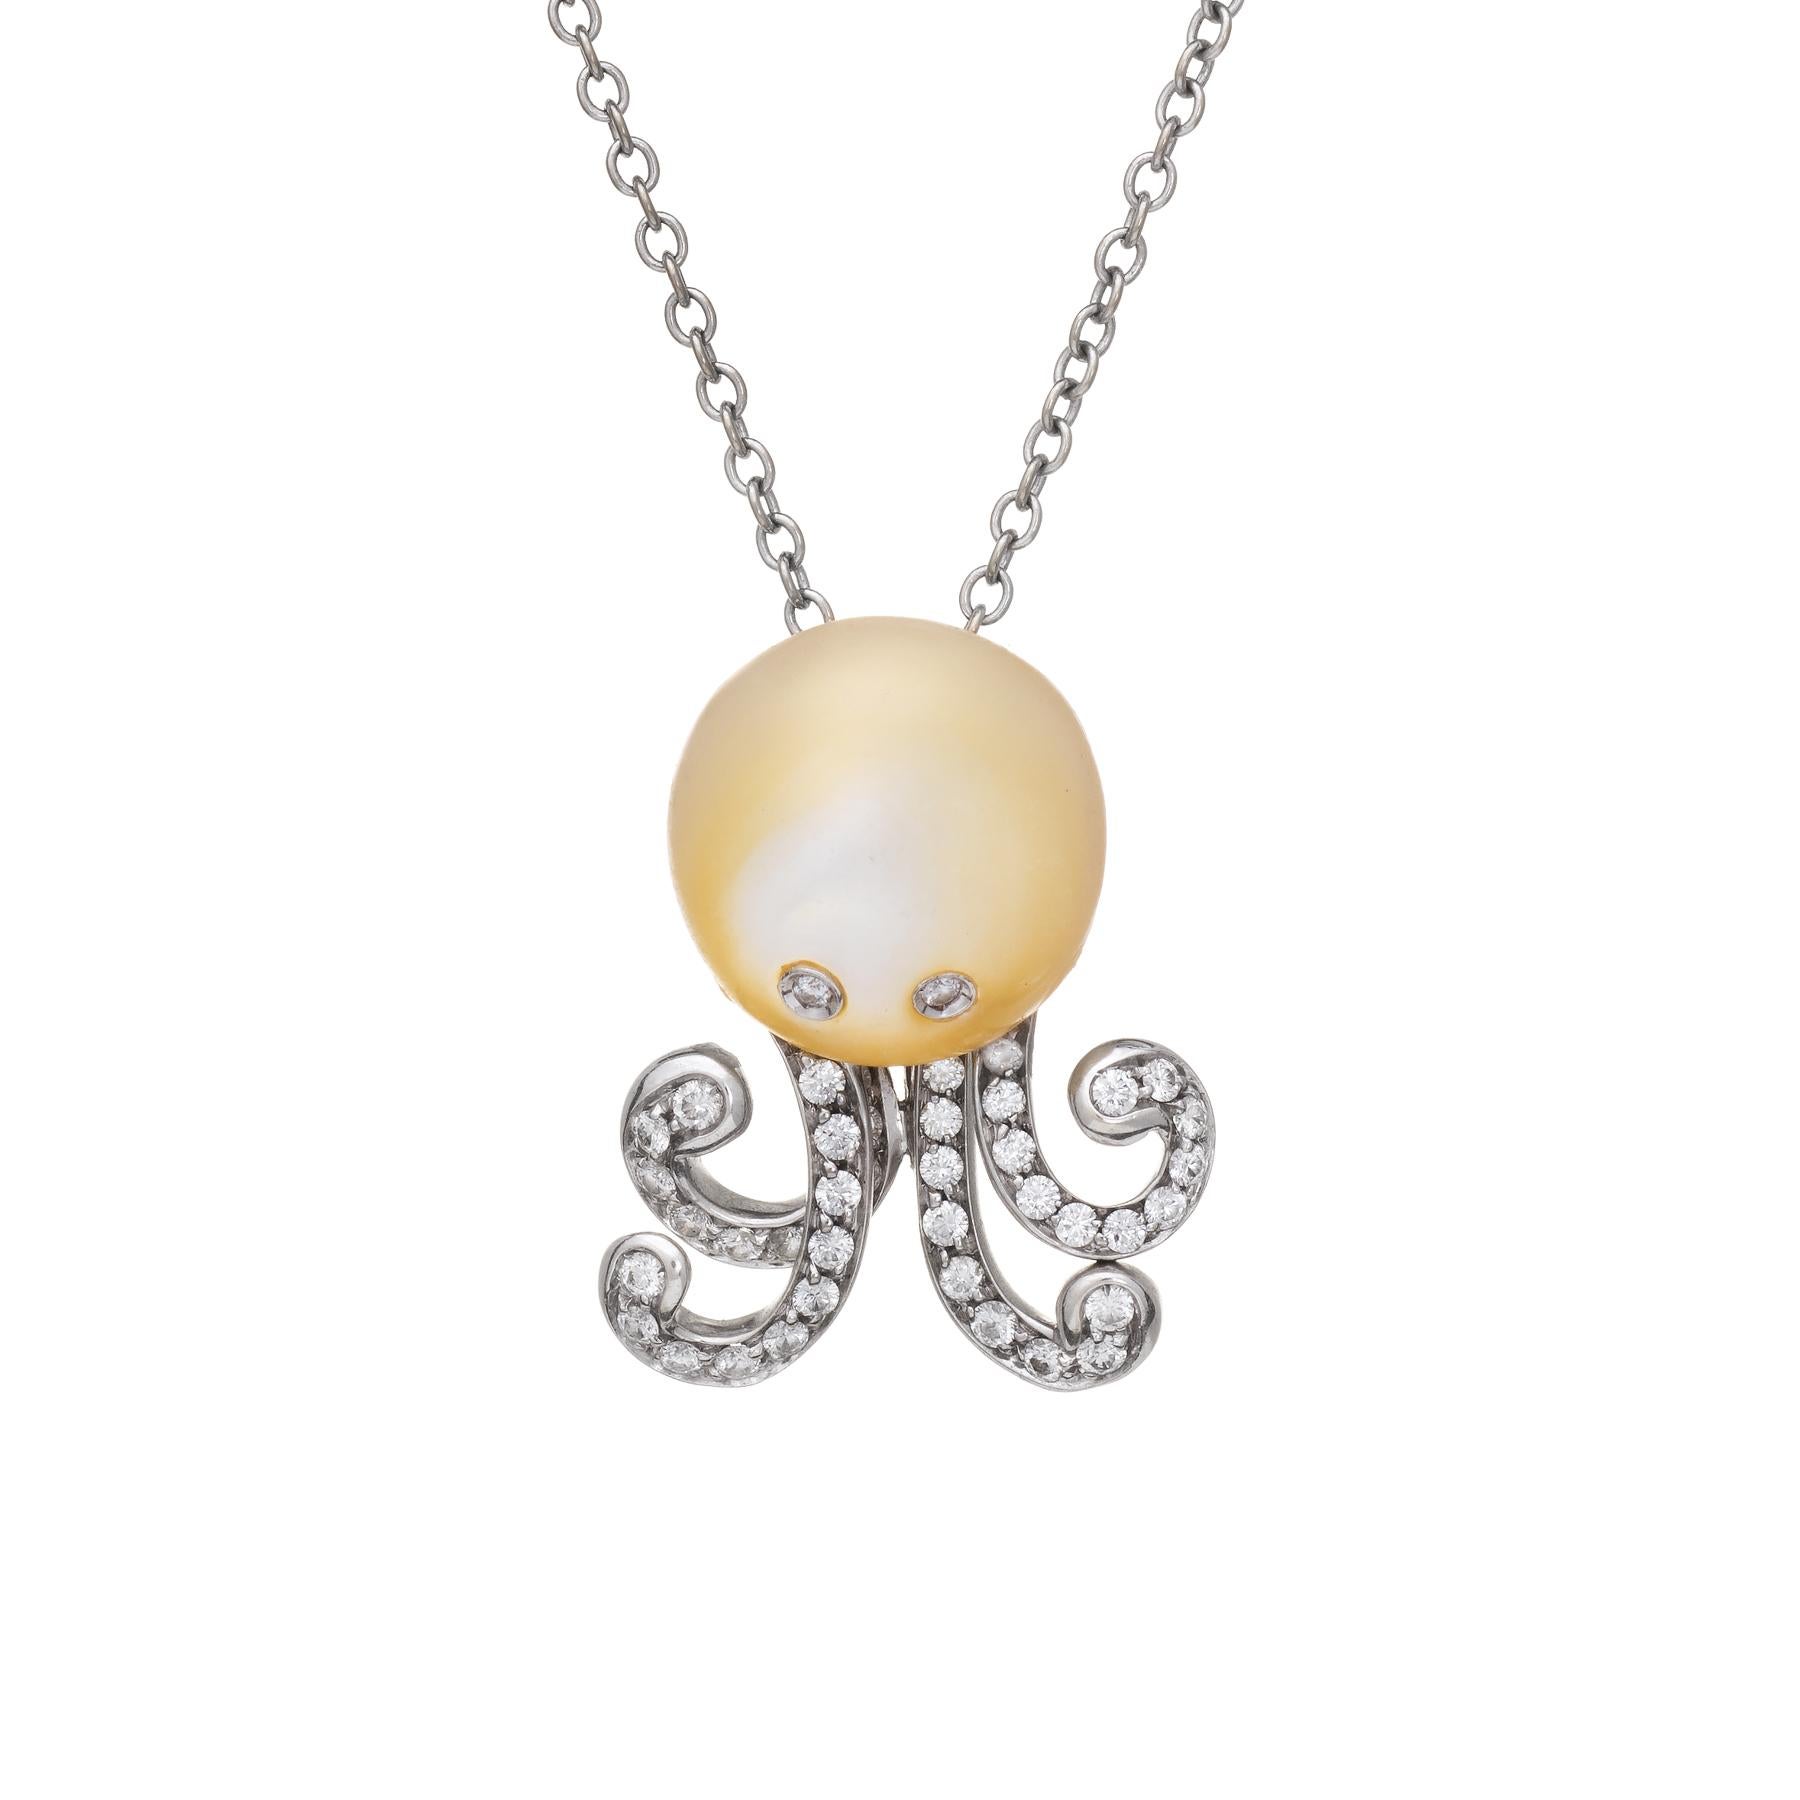 Charming and finely detailed Octopus necklace, crafted in 18 karat white gold.  

The head of the Octopus is comprised of mother-of-pearl measuring 15mm. The diamonds total an estimated 0.39 carats (estimated at H-I color and VS2-SI1 clarity). The